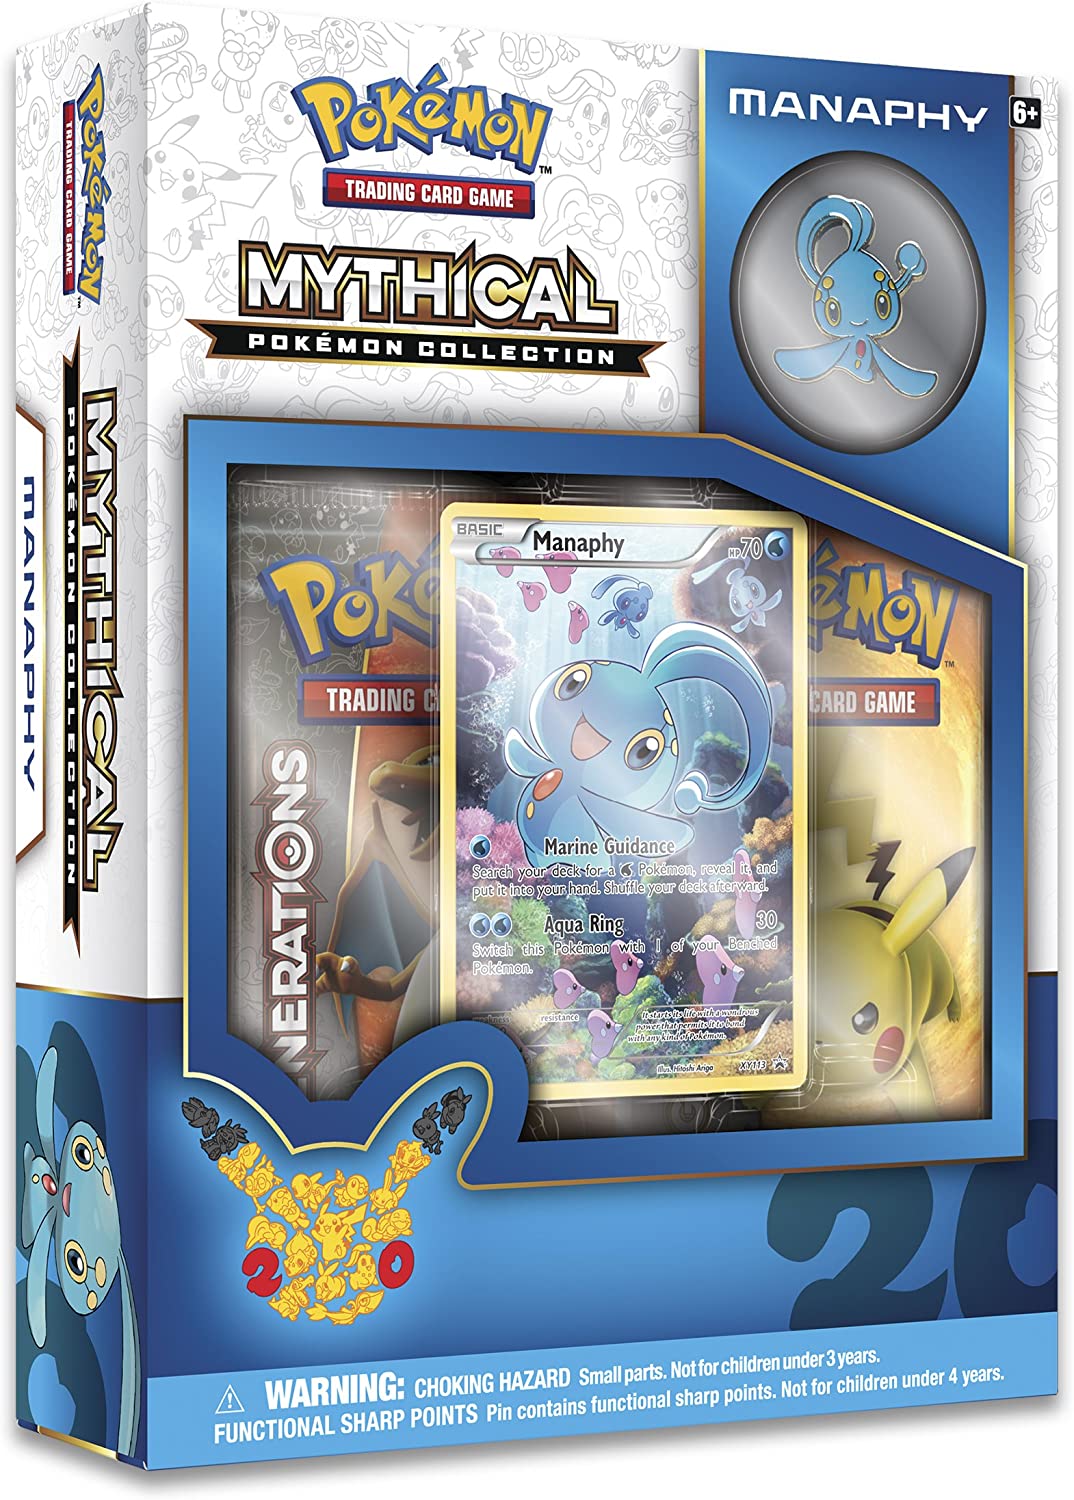 Generations - Mythical Pokemon Collection (Manaphy)